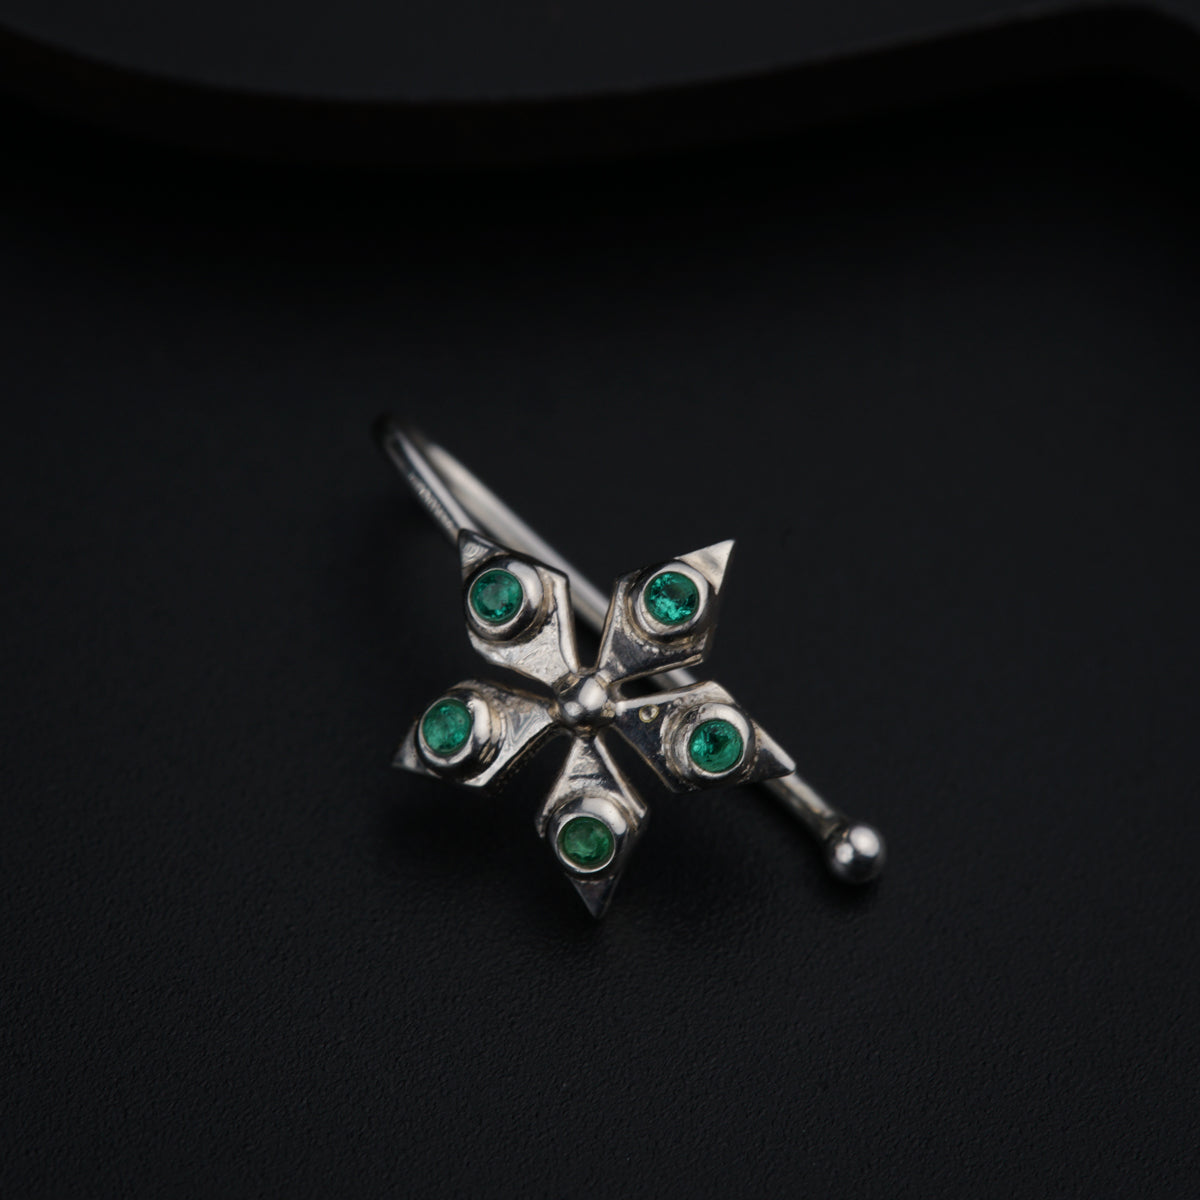 a silver brooch with green stones on a black surface